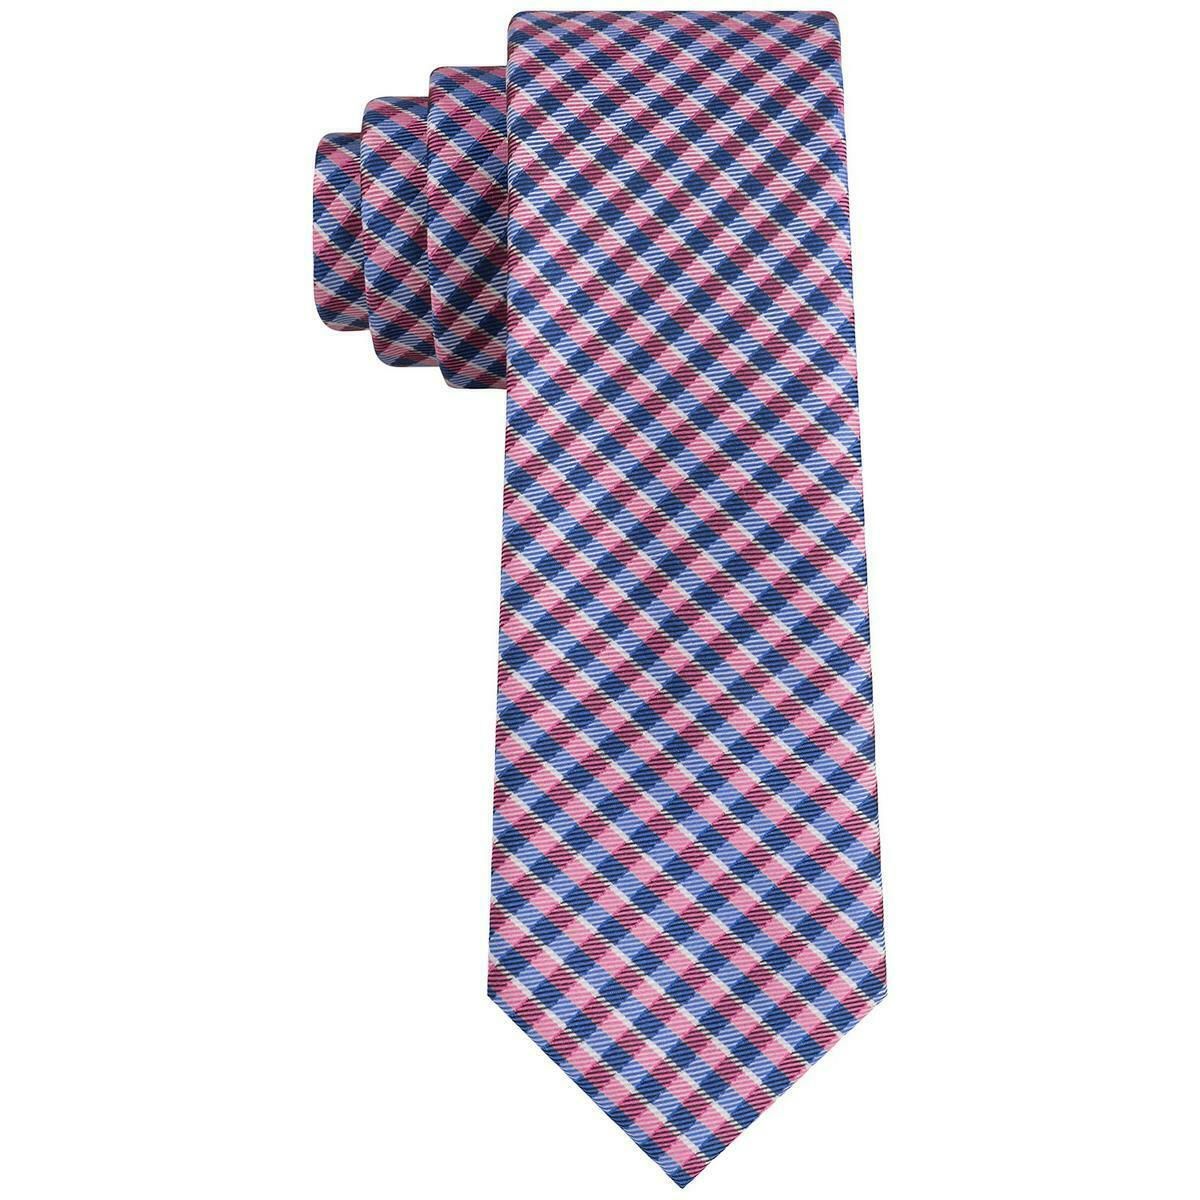 Color: Pinks Size: One Size Pattern: Plaids & Checks Type: Tie Width: Skinny (Material: Silk